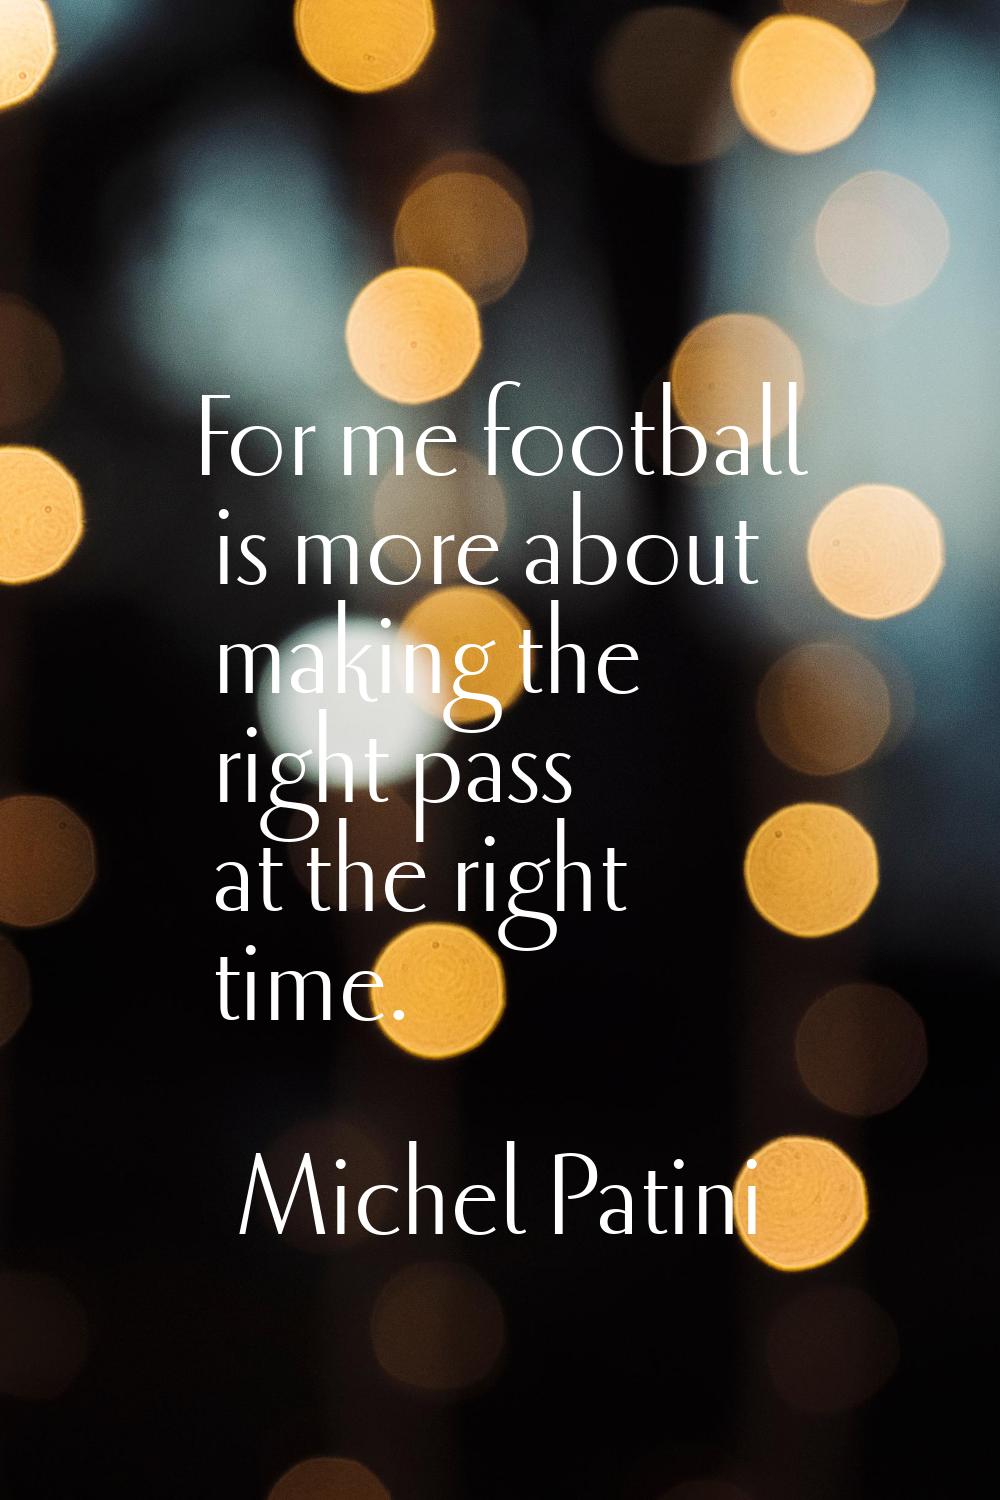 For me football is more about making the right pass at the right time.